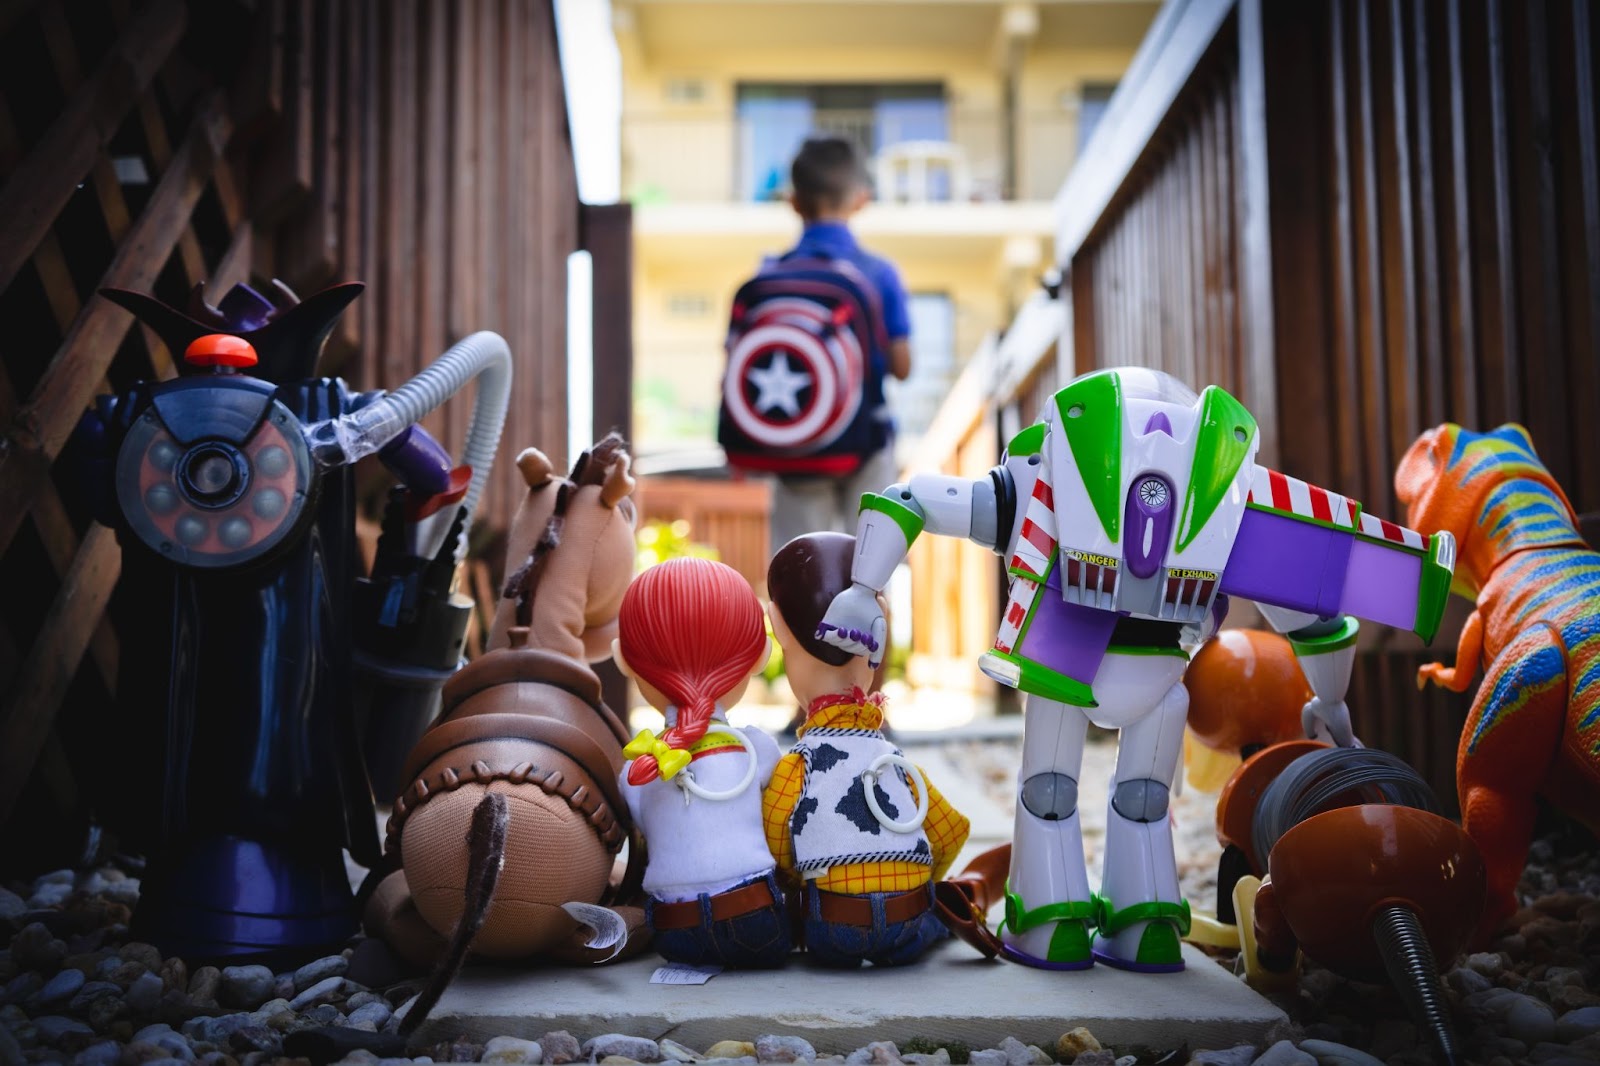 A group of toys lined up with a blurry kid in the background